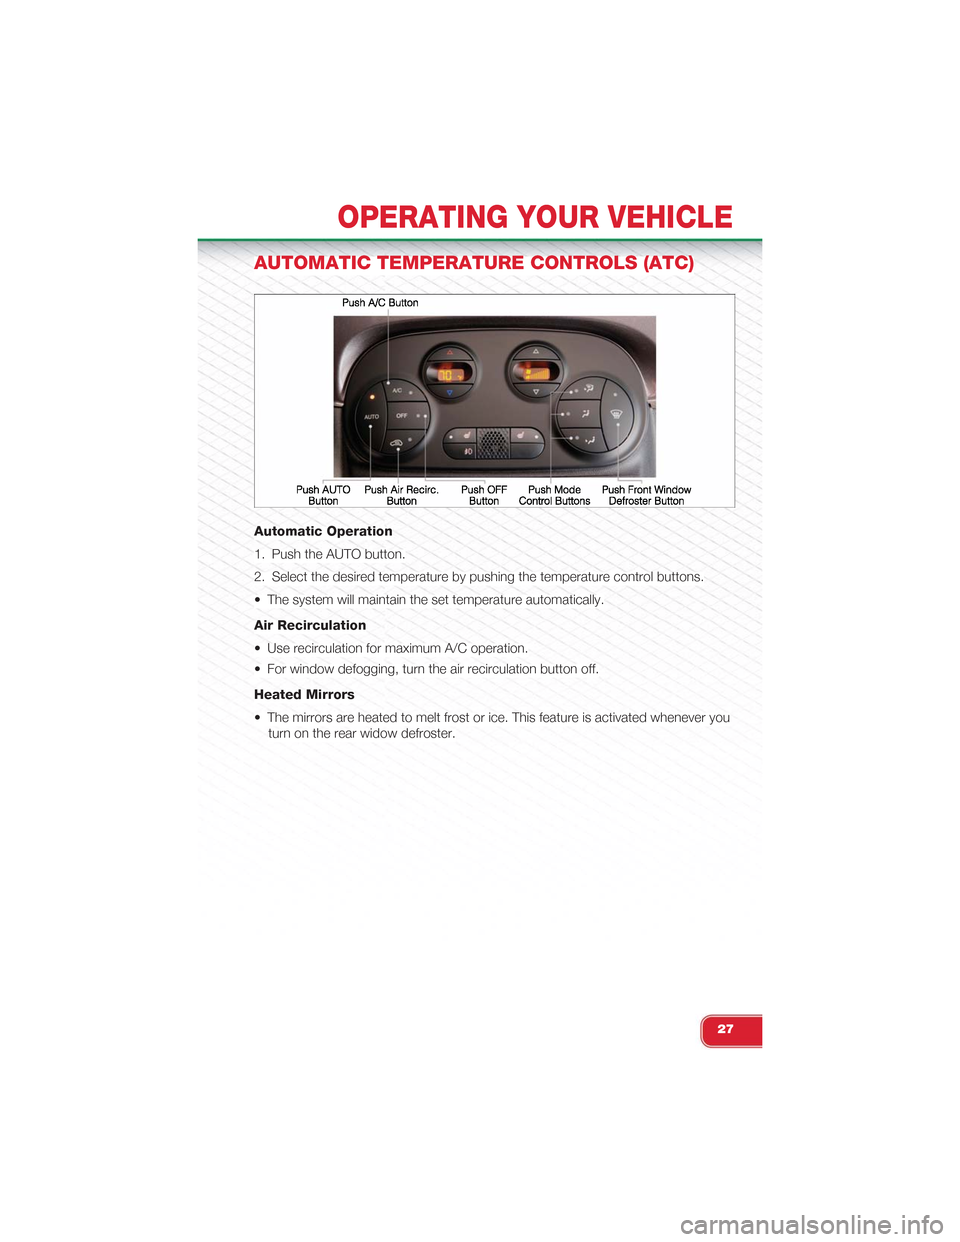 FIAT 500 ABARTH 2014 2.G User Guide AUTOMATIC TEMPERATURE CONTROLS (ATC)
Automatic Operation
1. Push the AUTO button.
2. Select the desired temperature by pushing the temperature control buttons.
• The system will maintain the set tem